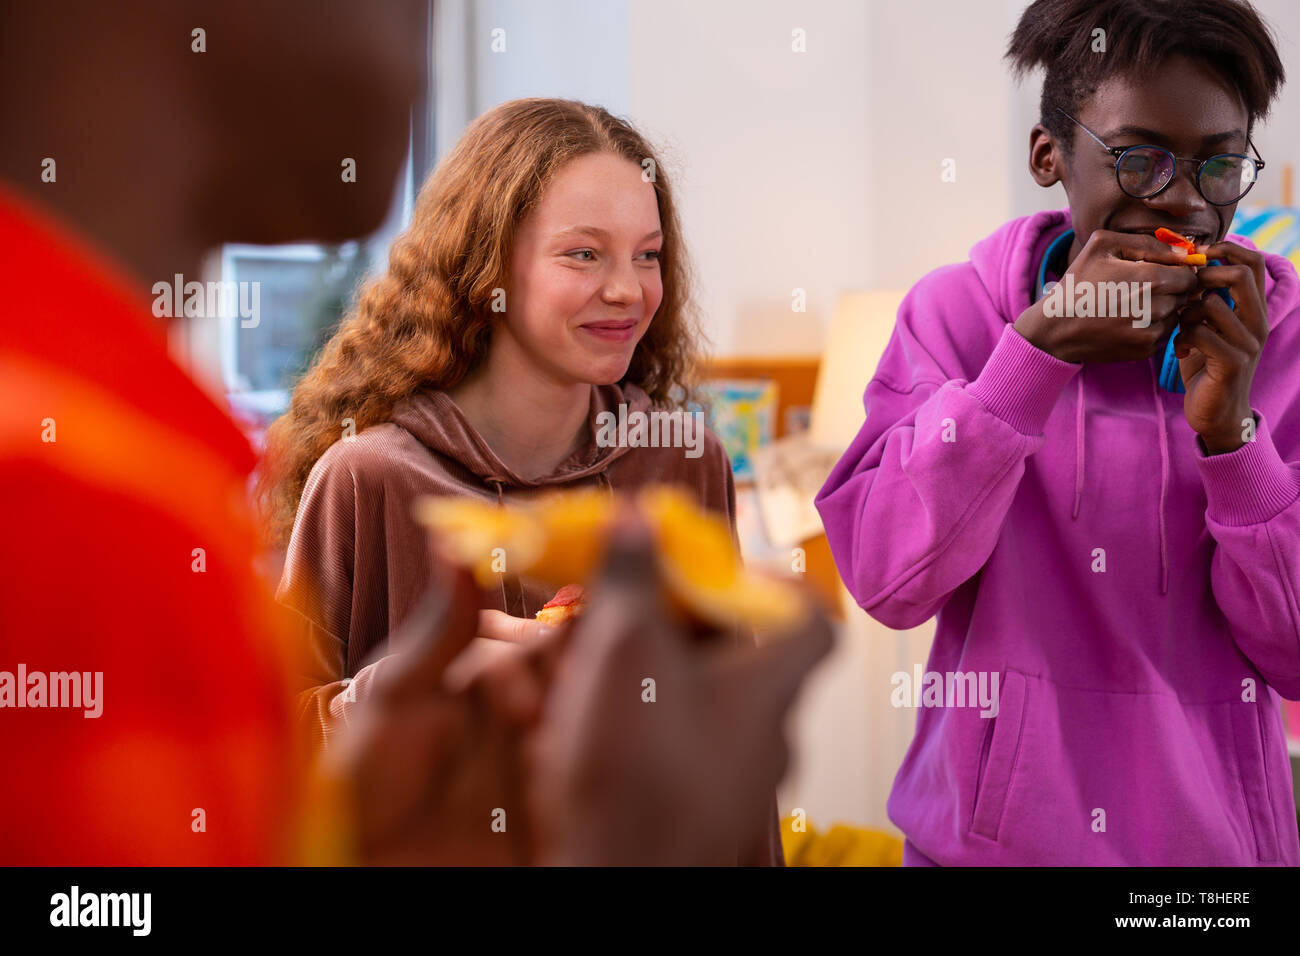 Girl laughing while having little pizza party with best friends Stock Photo